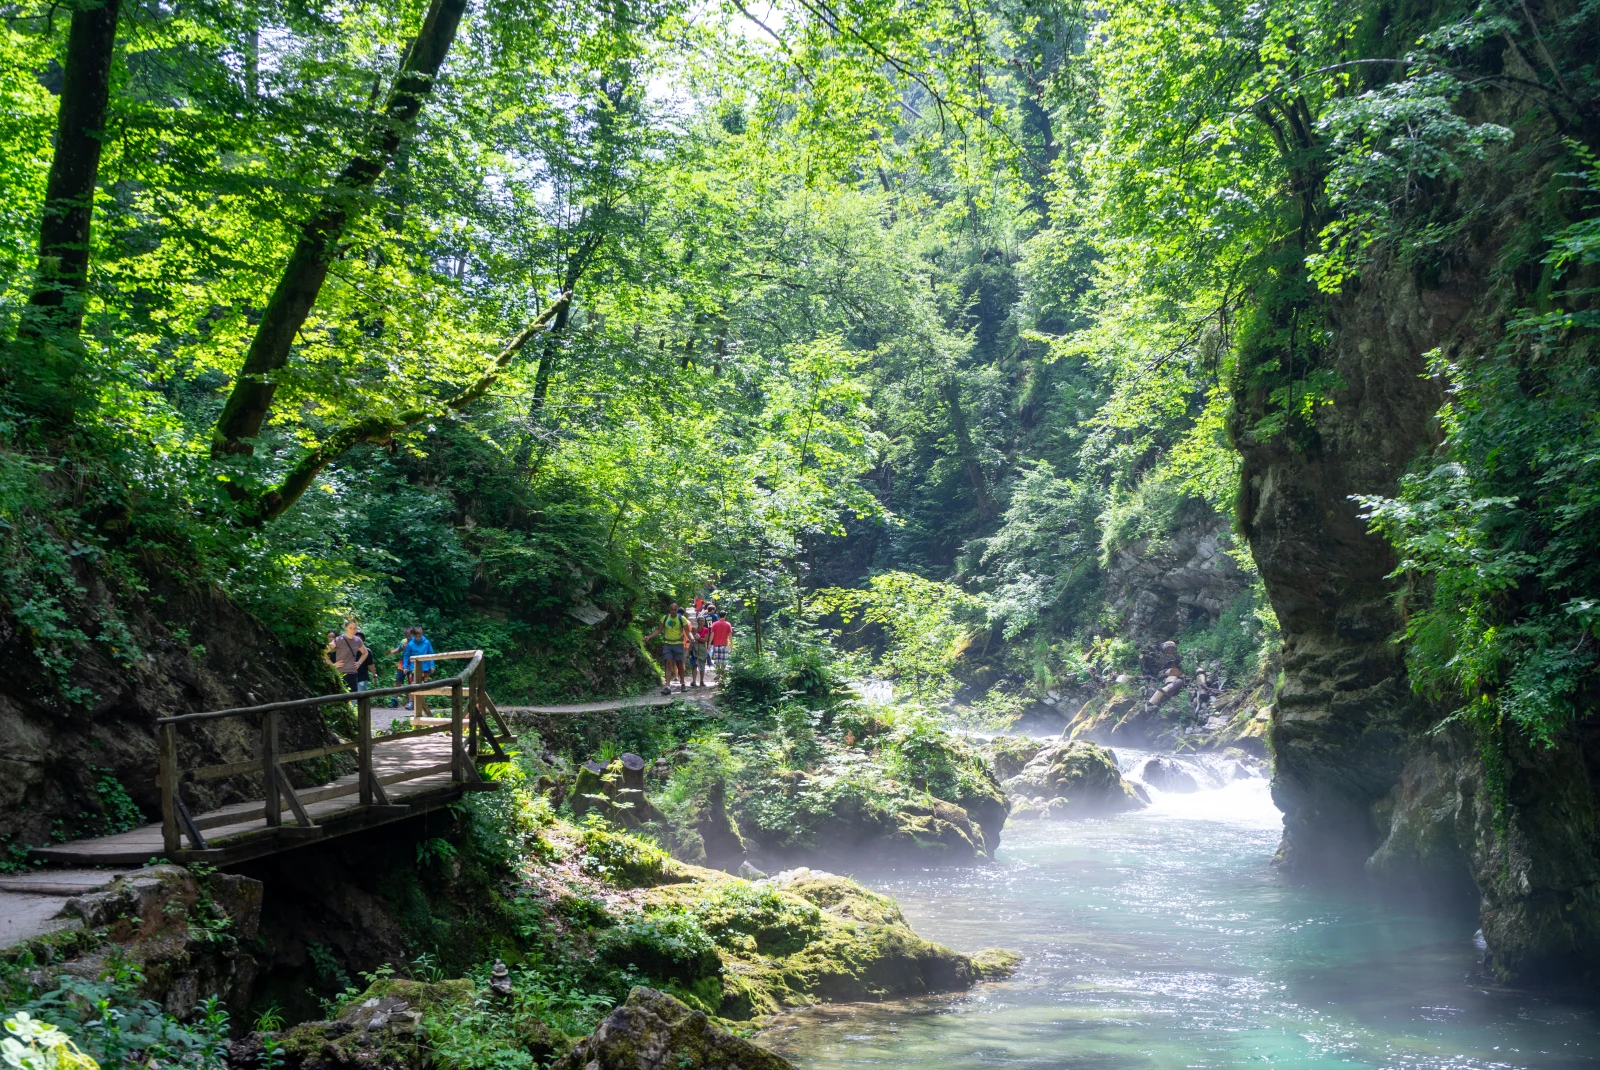 Waterfalls and gorge pathways across a verdant forest in Slovenia. 